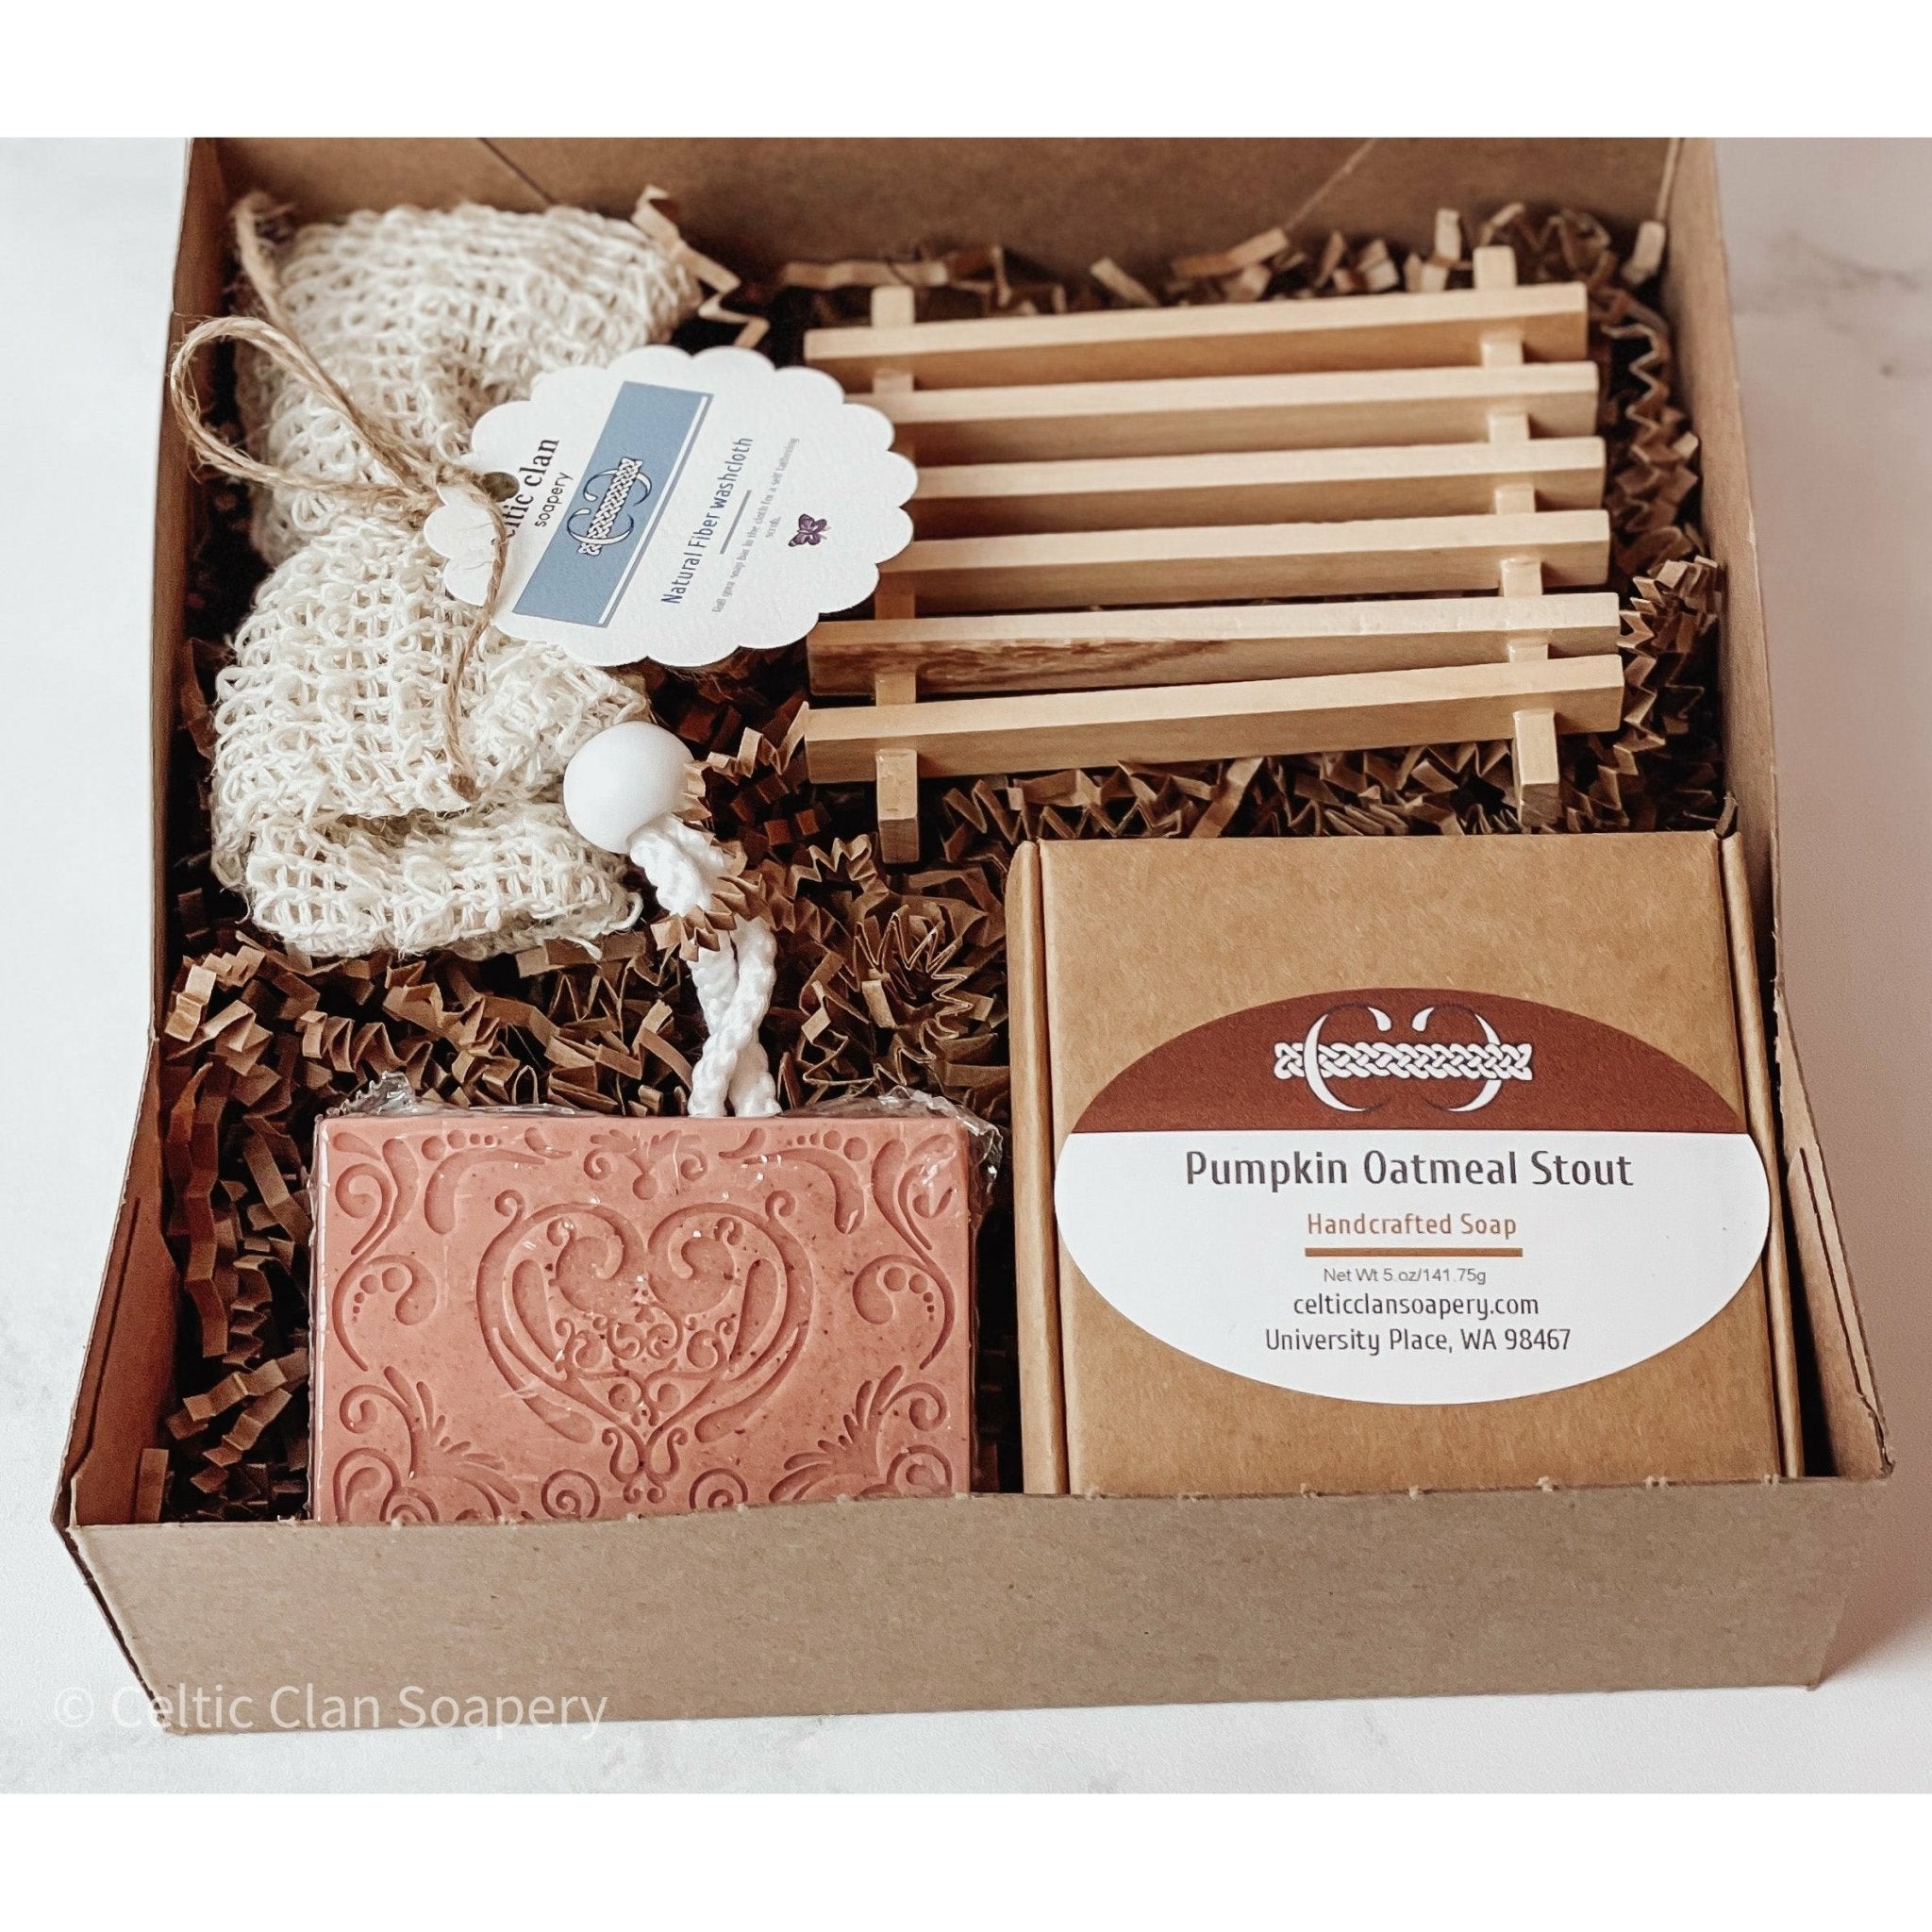 Assorted Gift Boxes | Handmade Soap & Accessories - Celtic Clan Soapery LLC